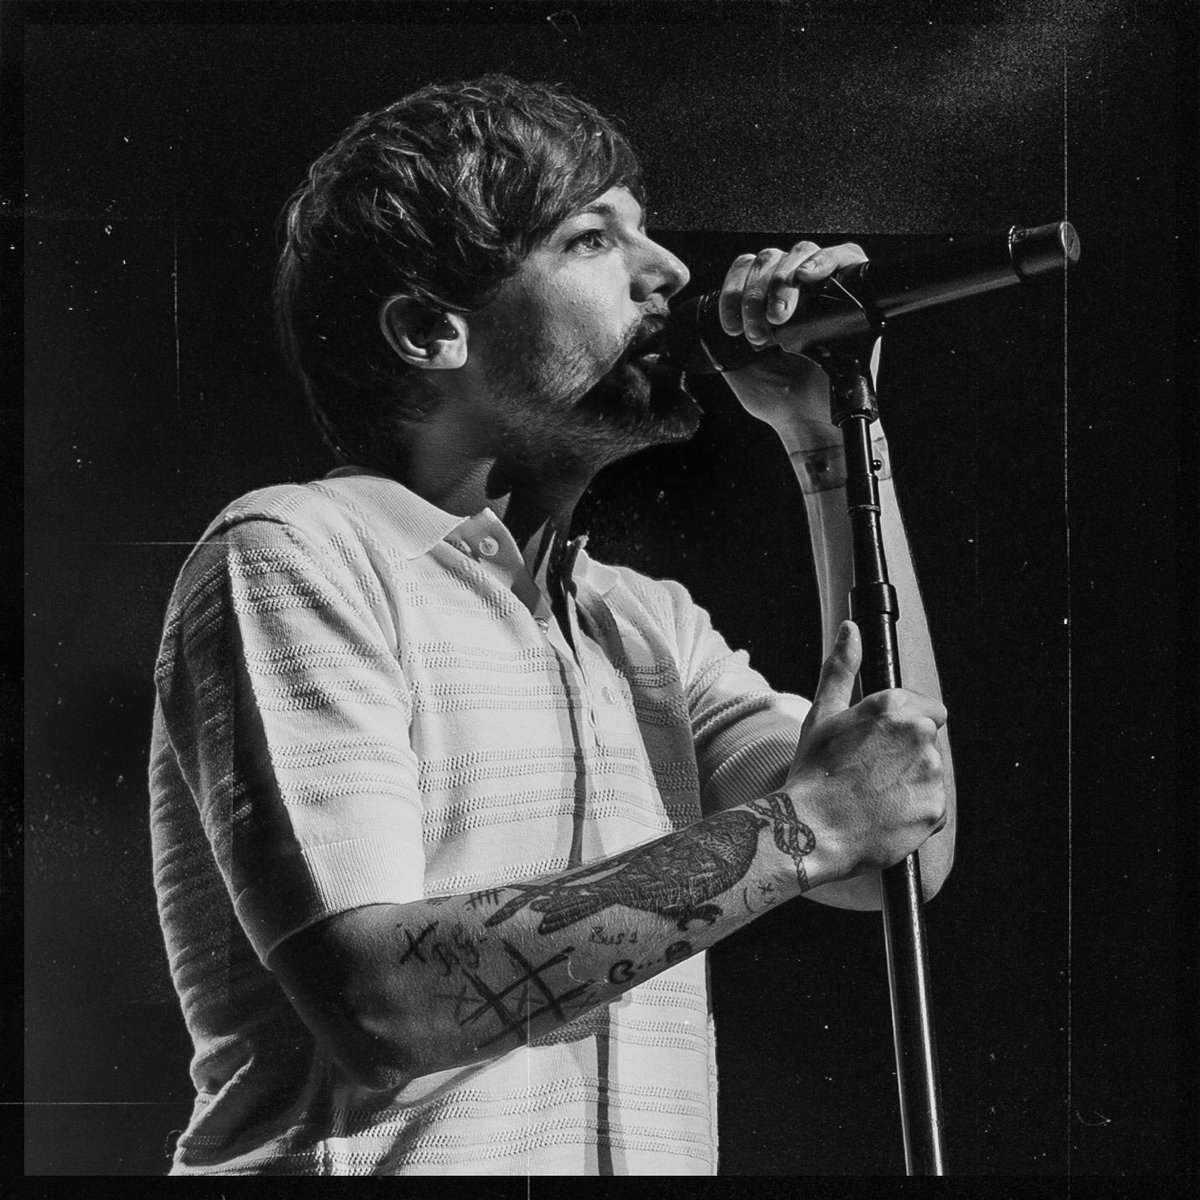 102 days to goJust got over 100 days until I get to see Louis live!! We’ve got 49 days til we finally get to Cherish the masterpiece that is Louis’ first ever solo album that he’s been working extremely hard on. We’ll give endless appreciation/support that’s well deserved!!